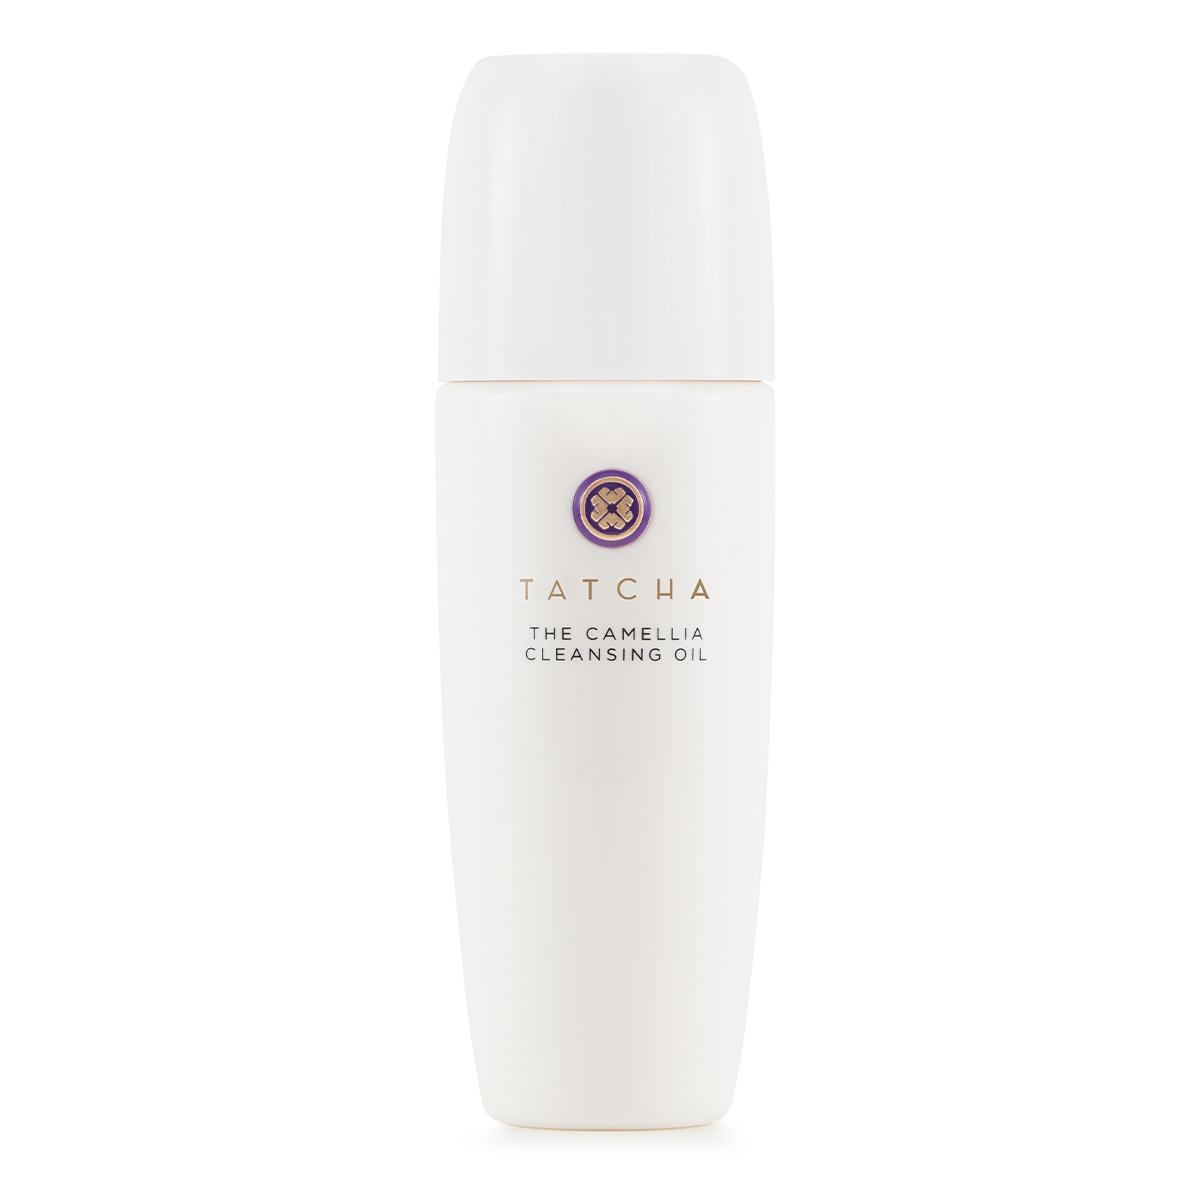 A tatcha The Camellia Cleansing Oil